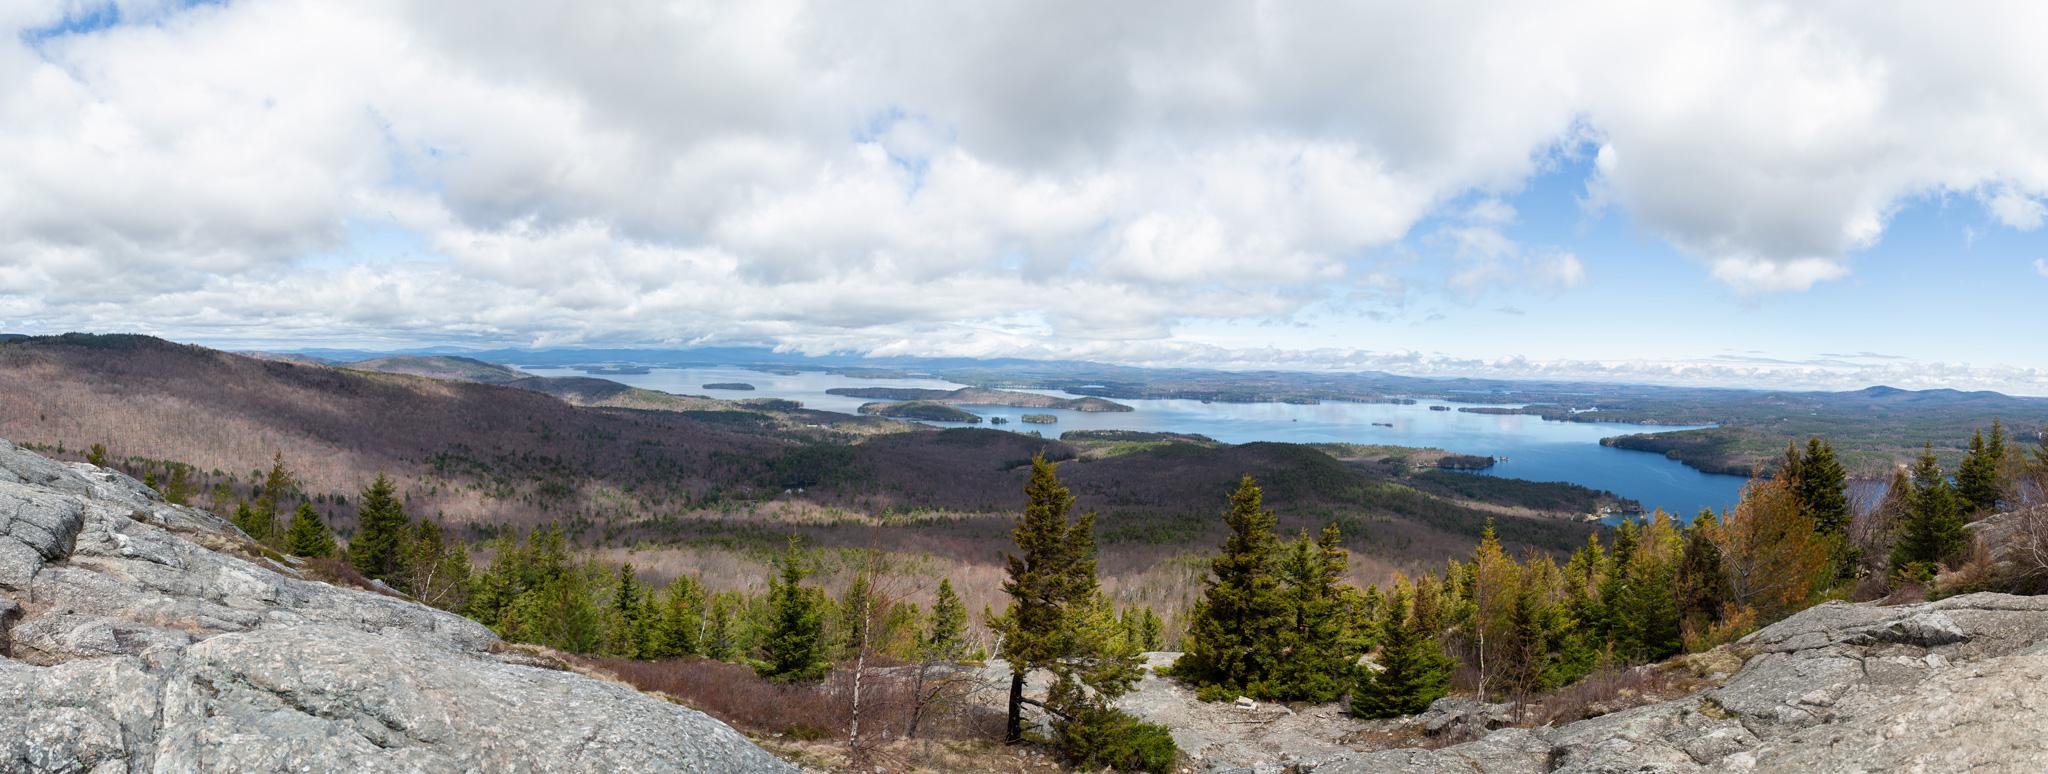 A panorama of Lake Winnipesaukee in the summer as seen from the top of Mount Major.